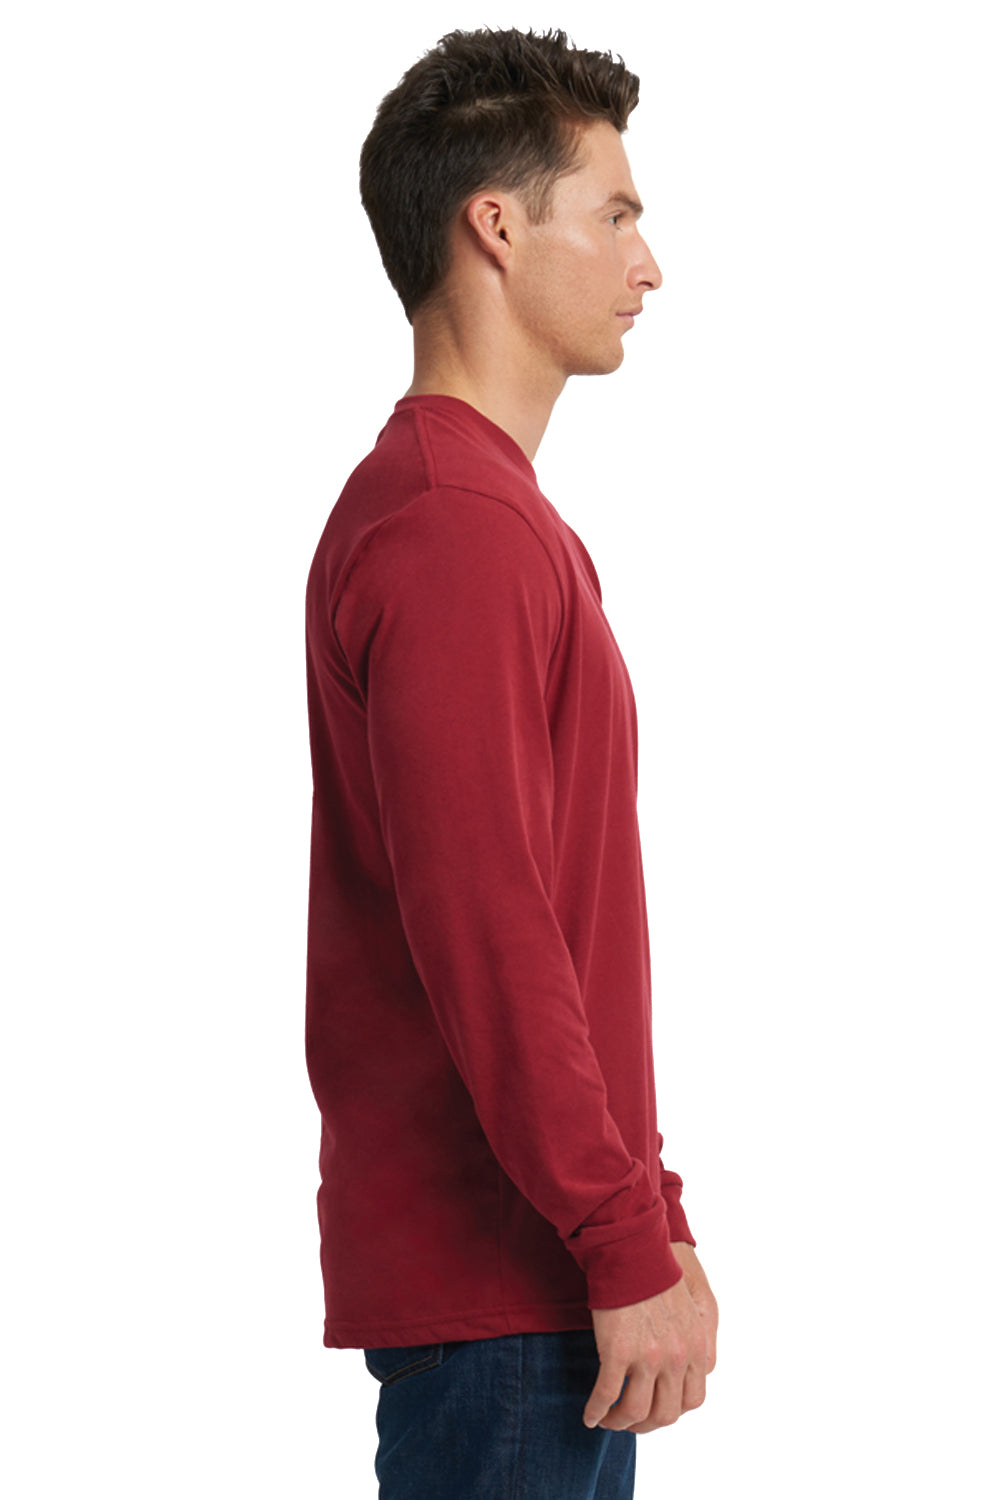 Next Level 6411 Sueded Jersey Long Sleeve Crewneck T-Shirt Cardinal Red Side